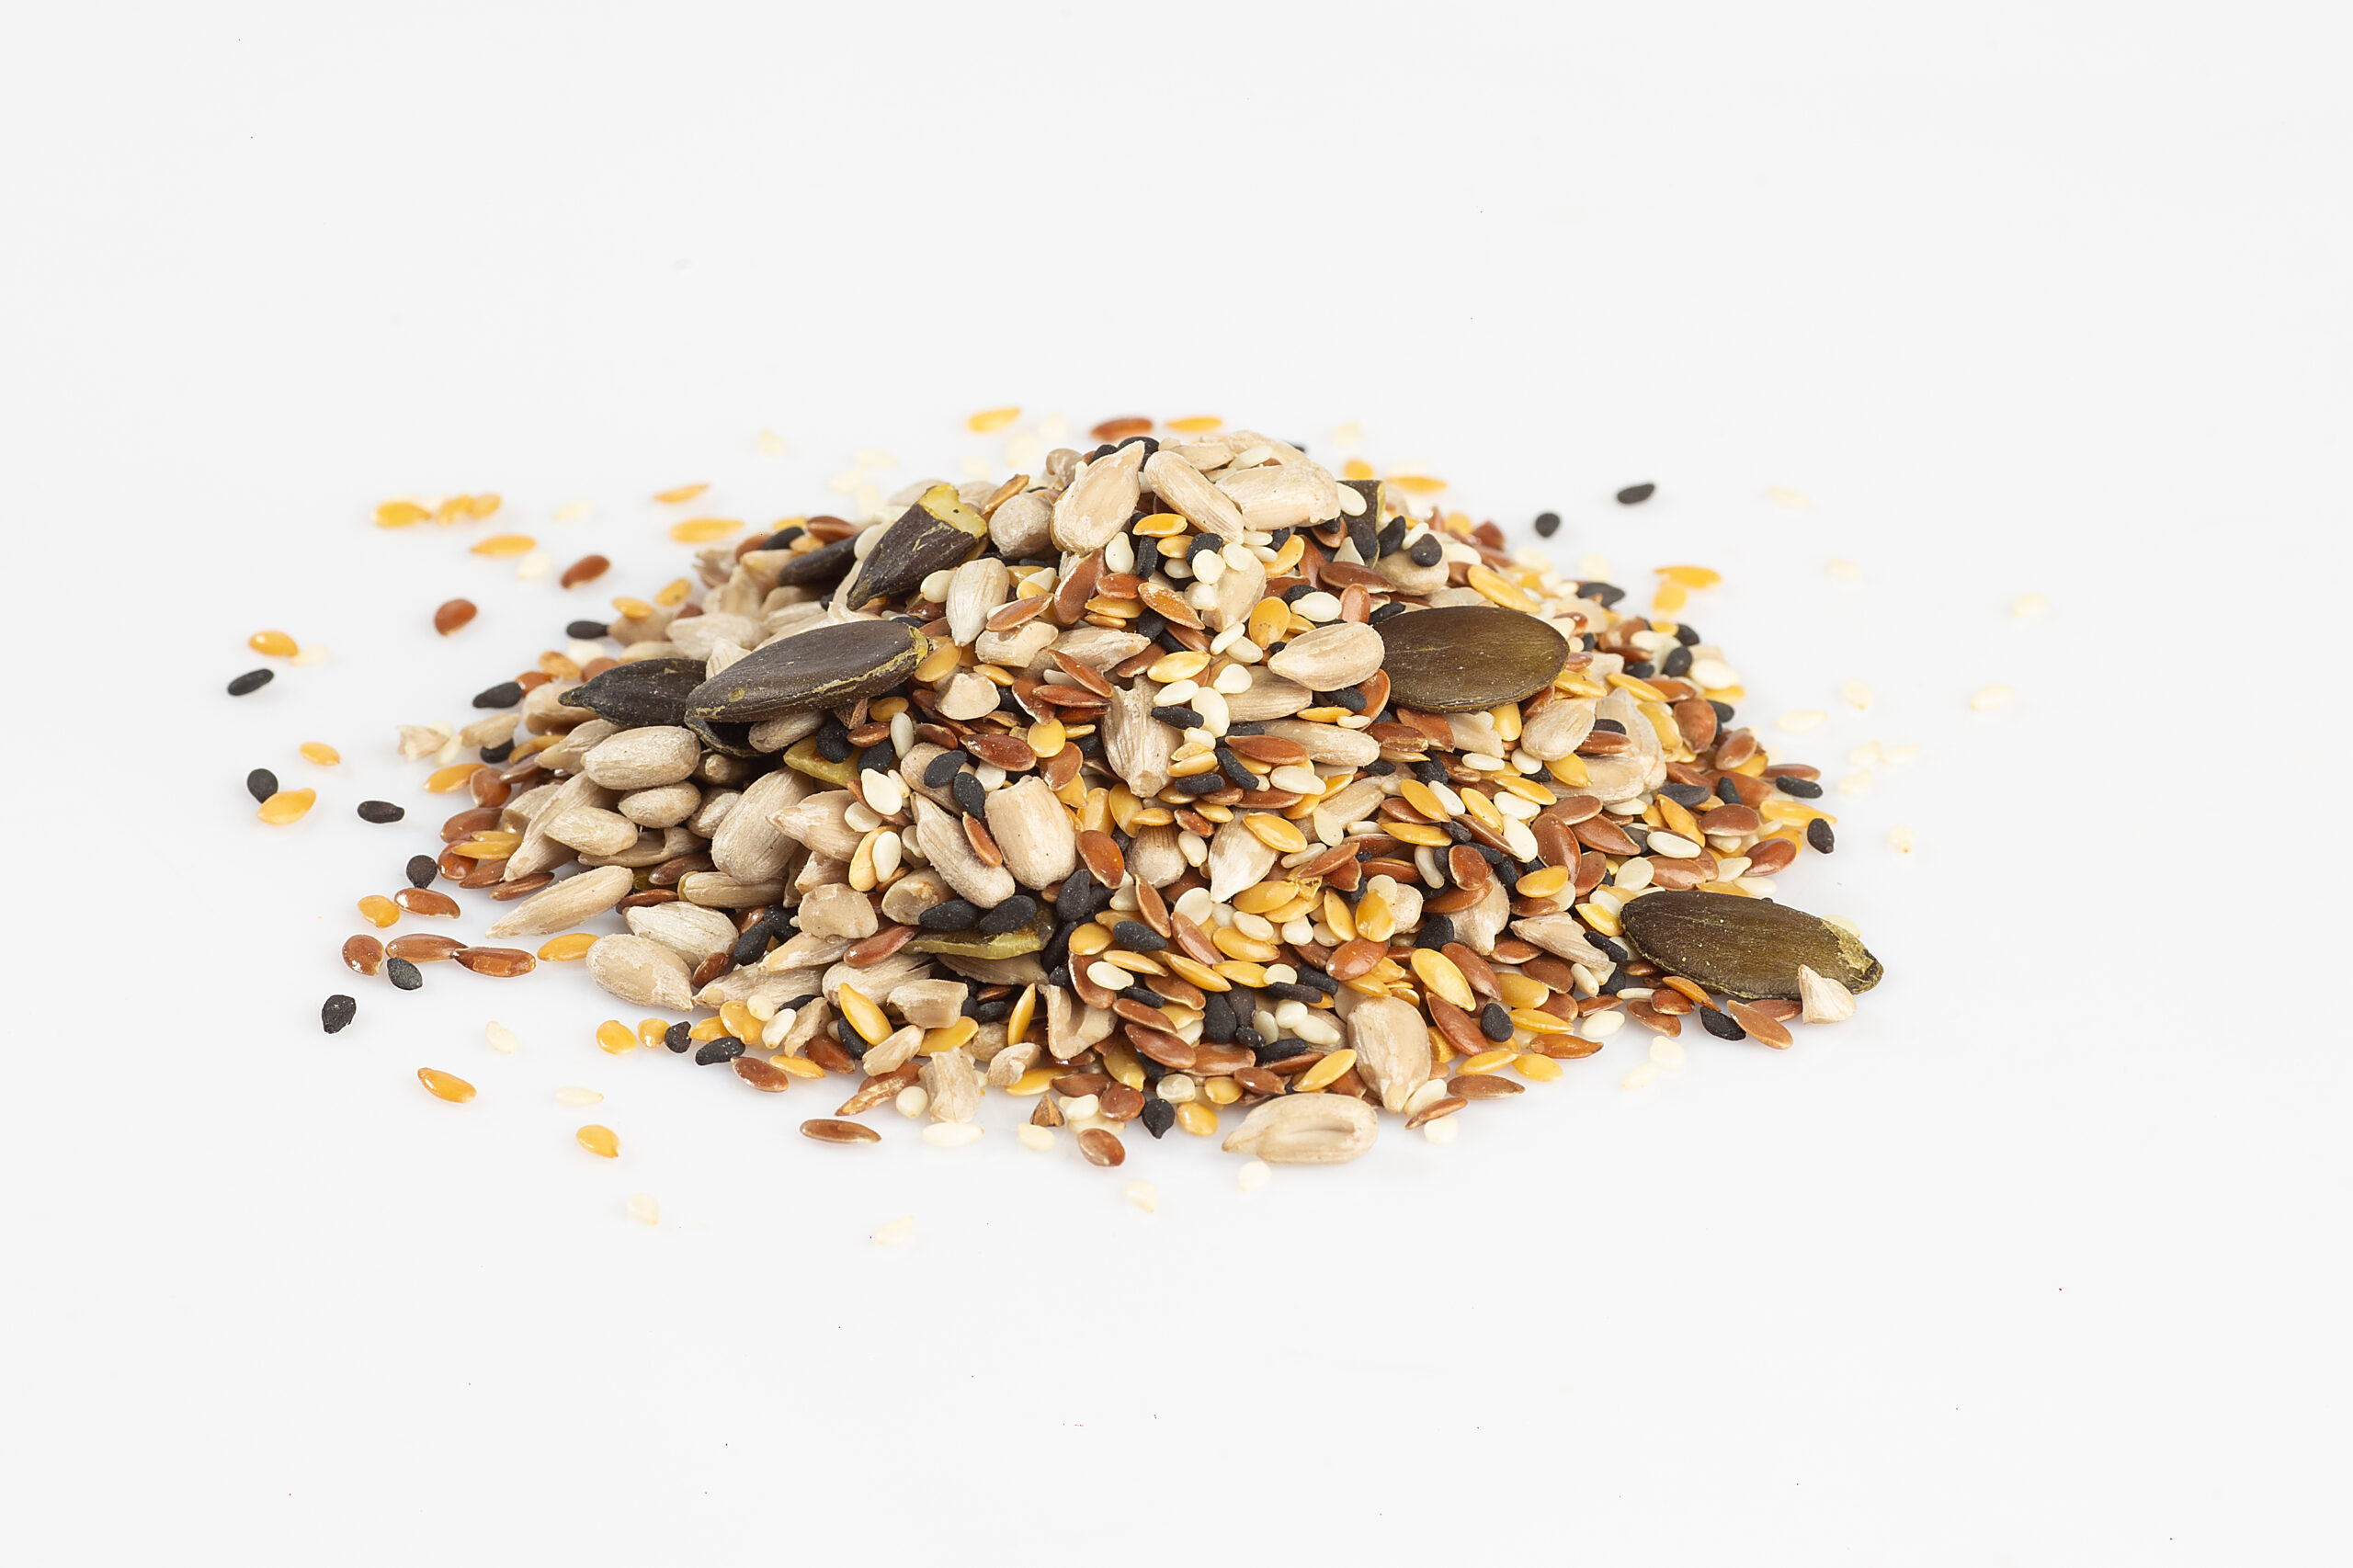 Raw seeds mix against white background.